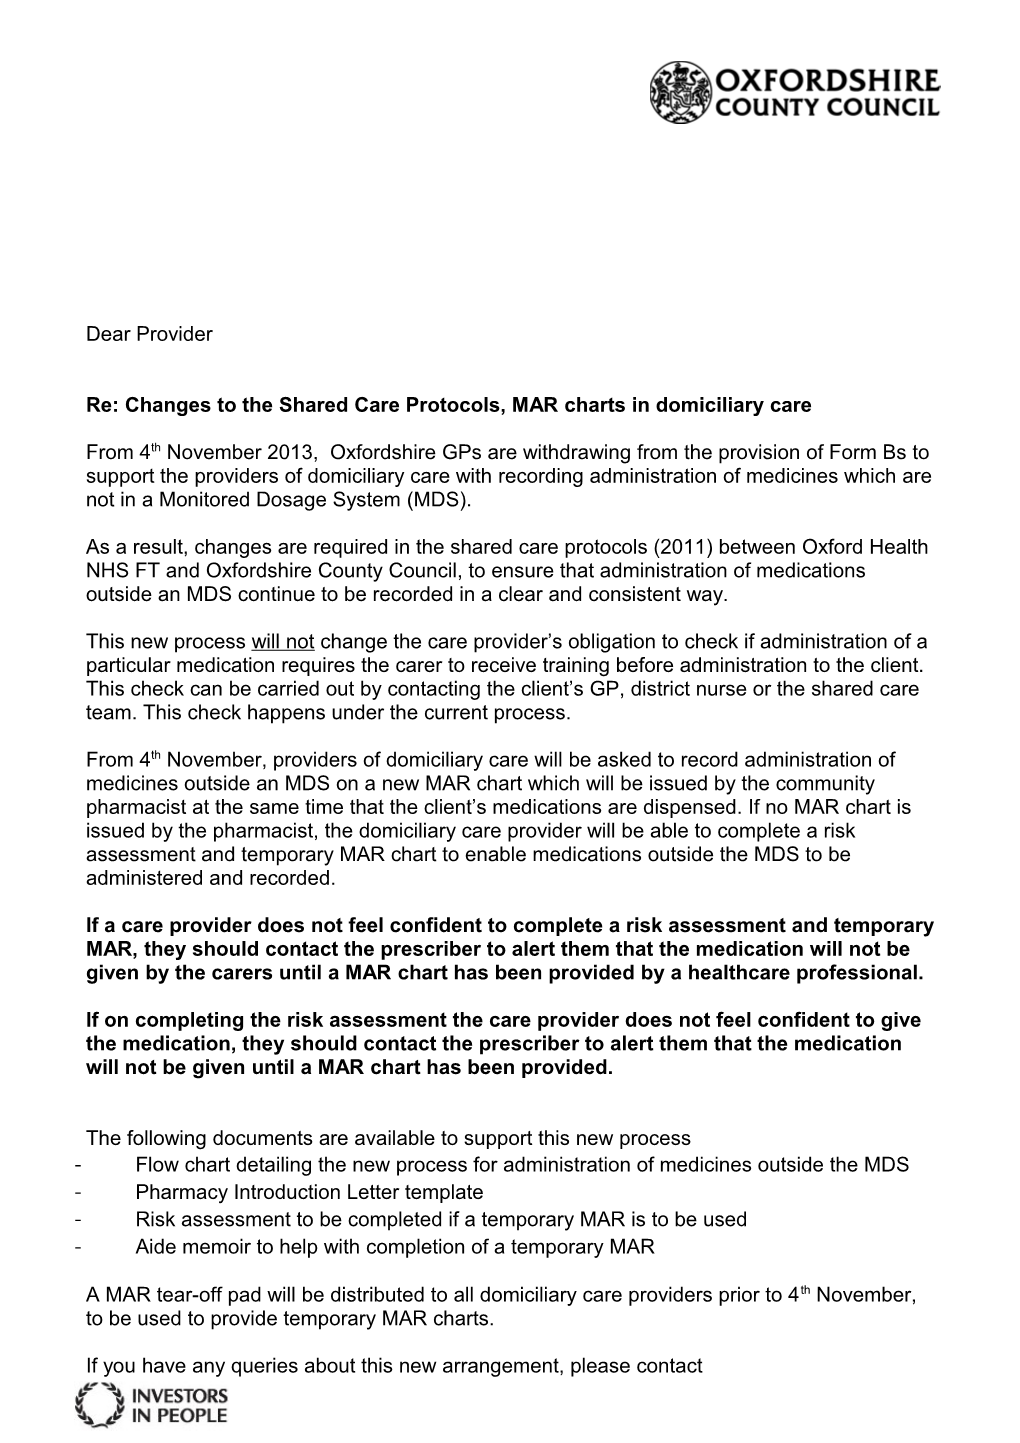 Re: Changes to the Shared Care Protocols, MAR Charts in Domiciliary Care